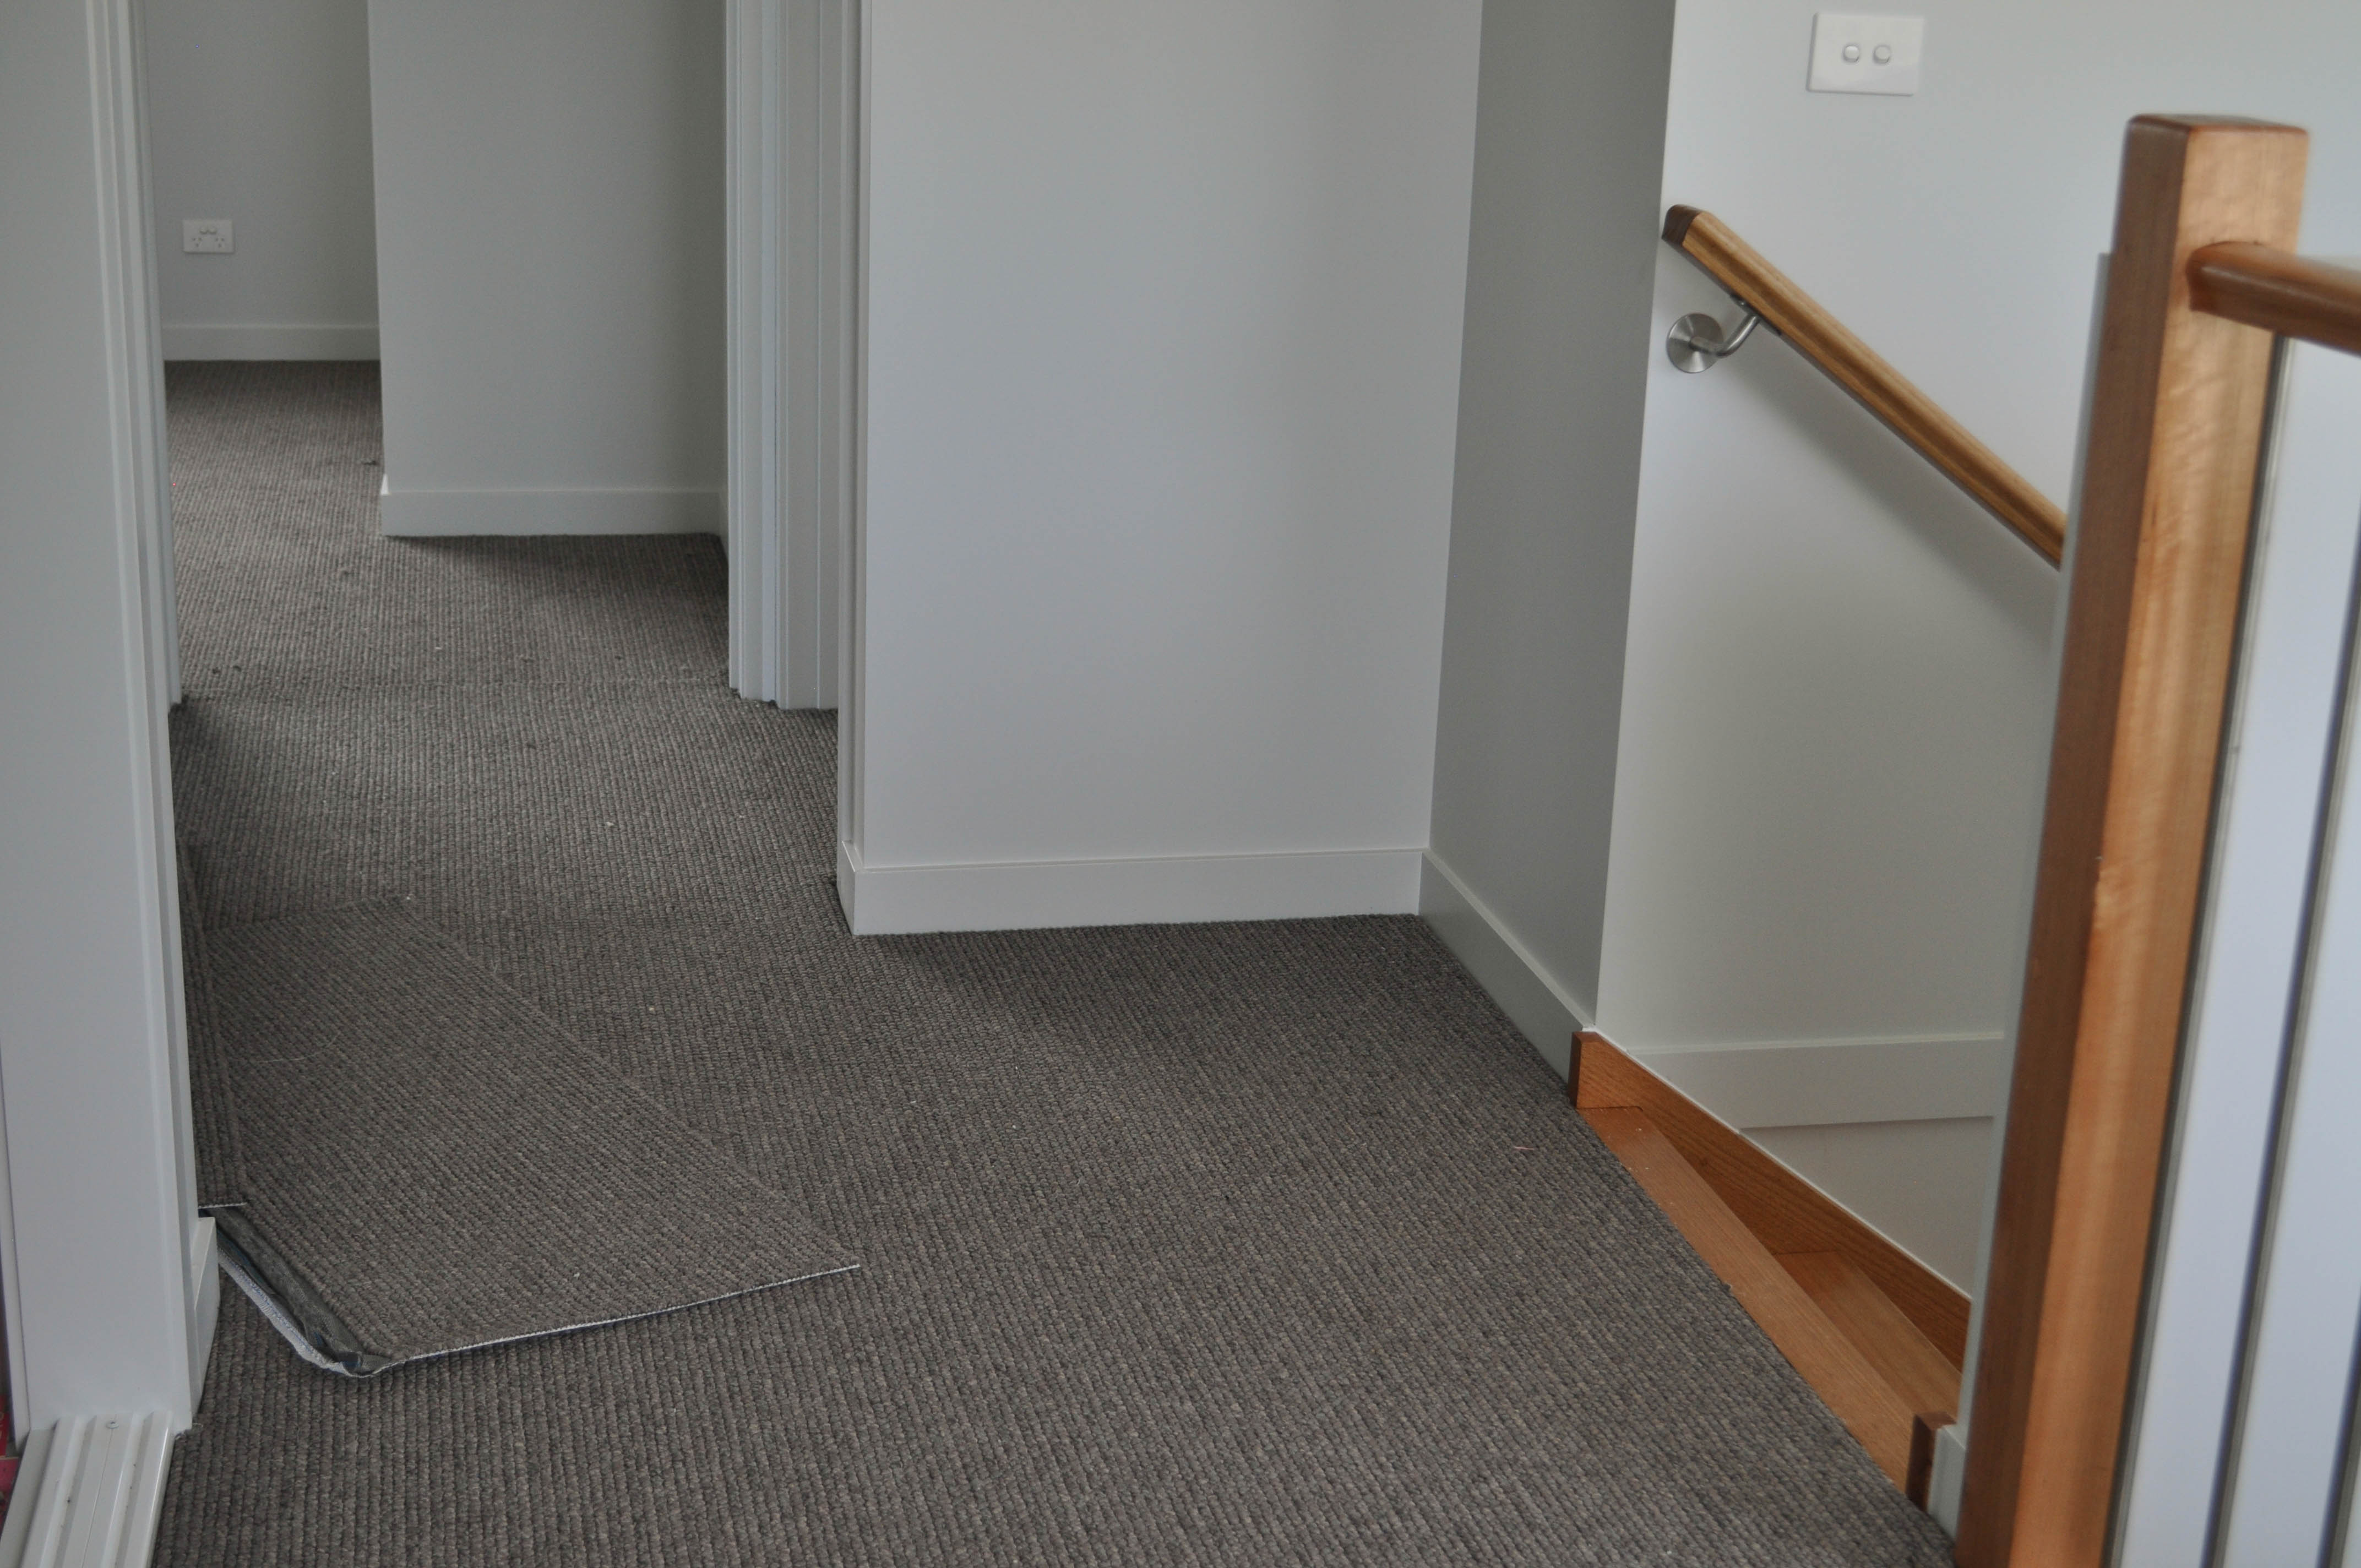 showing the floor of a passage with rooms running of it that is carpeted with a beige sisal loop pile carpet made by EC Carpets of South Australia, 
	  laid in a Werribee townhouse by Concord Floors.